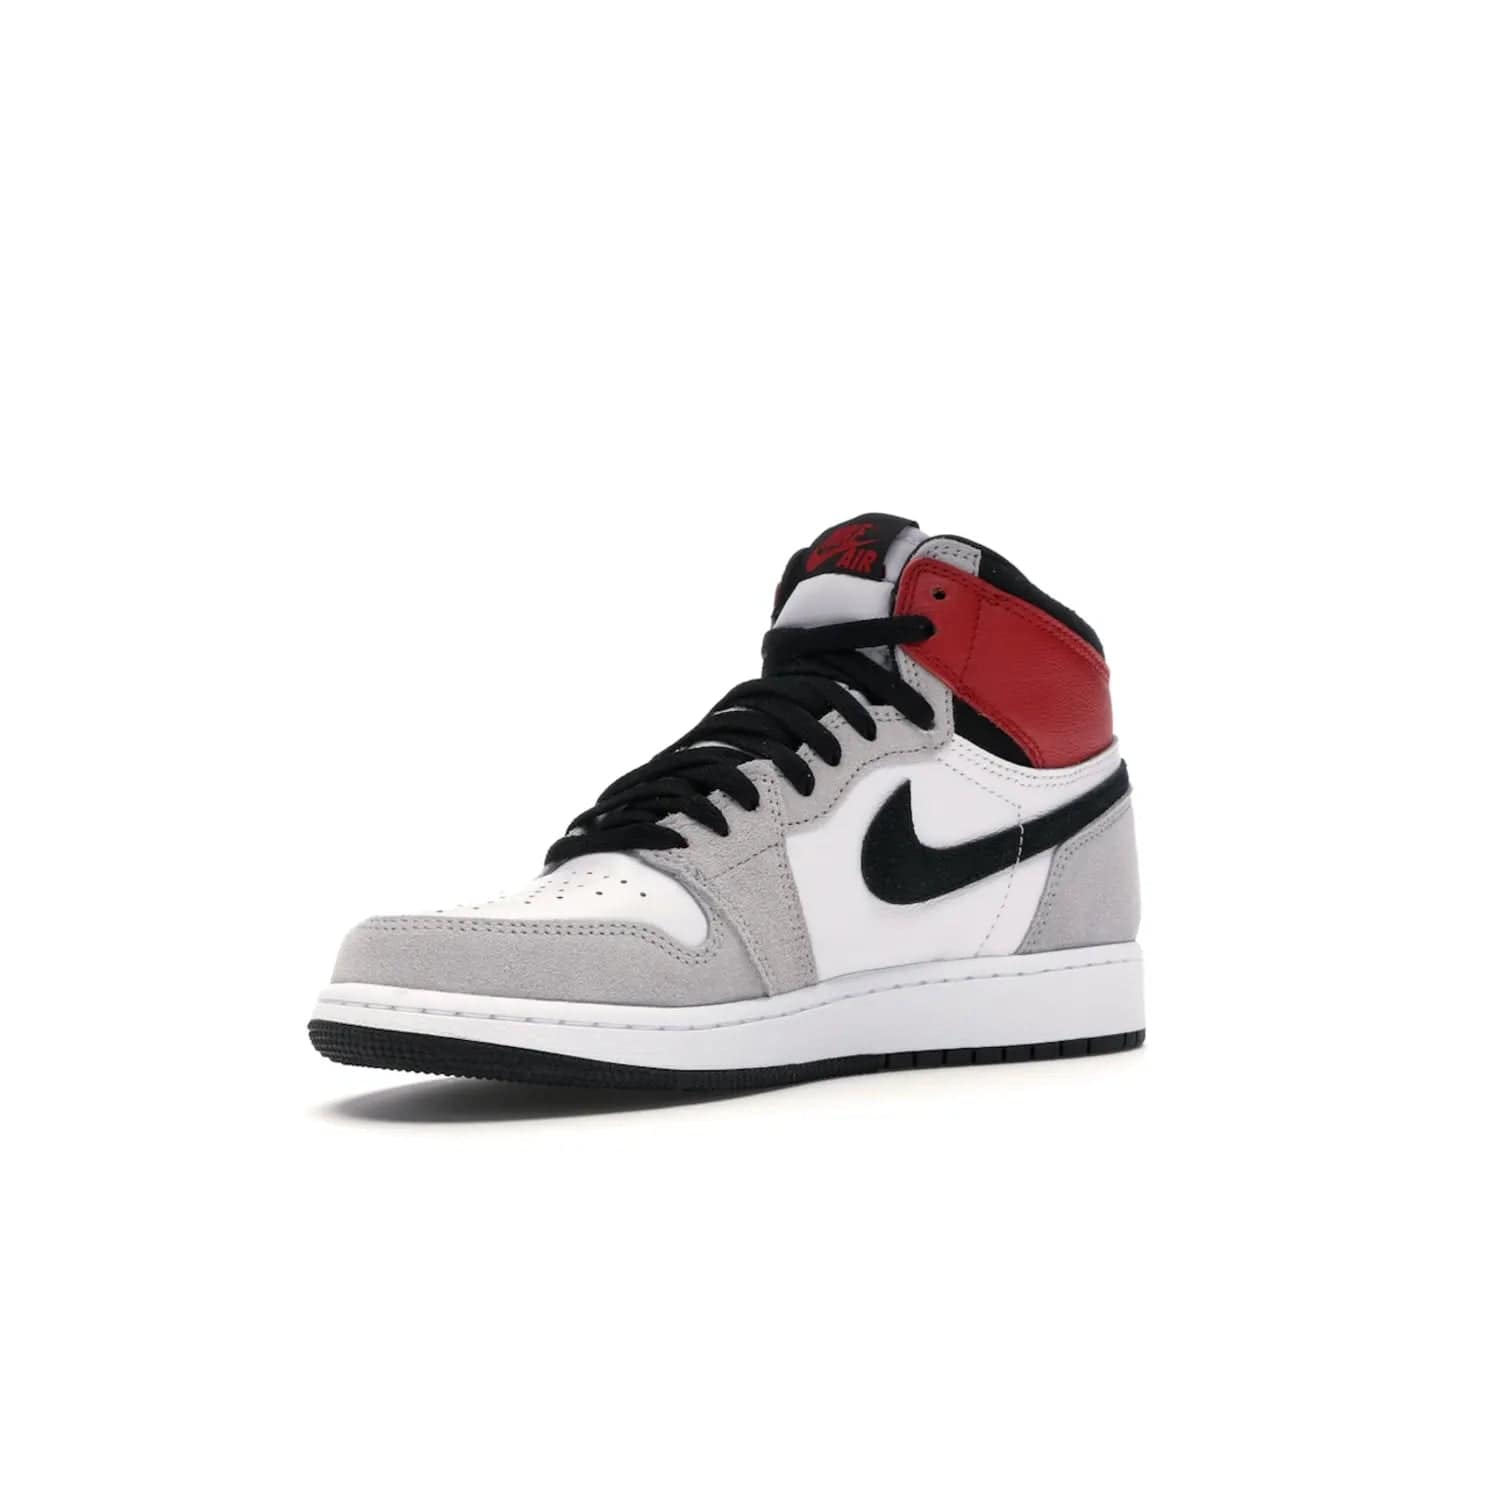 Jordan 1 Retro High Light Smoke Grey (GS) - Image 15 - Only at www.BallersClubKickz.com - Jordan 1 Retro High Light Smoke Grey (GS) features shades of grey, black, and Varsity Red with a bold silhouette. Premium white leather and suede overlays create a unique look. Released July 2020, offering style and performance. Perfect sneaker for any collector or fan.